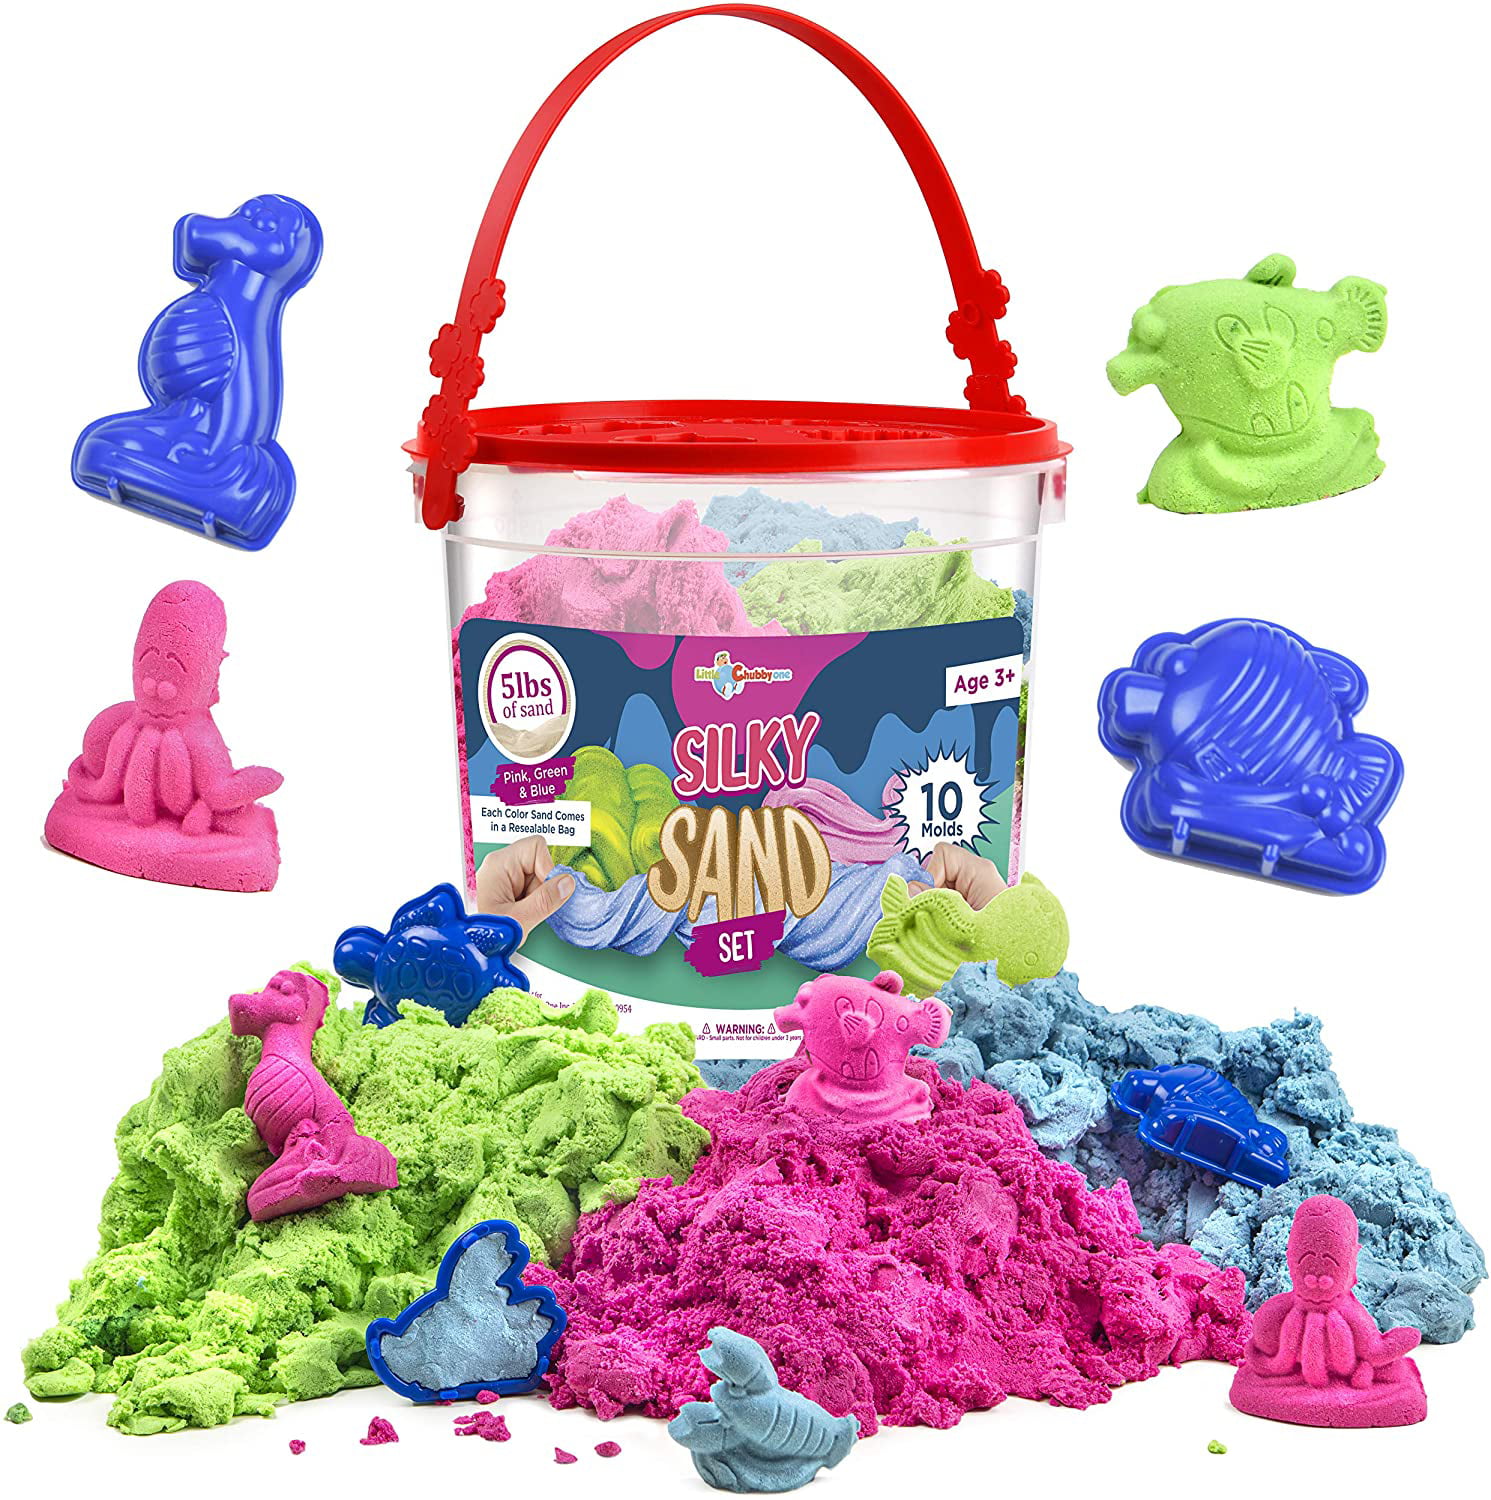 LITTLE CHUBBY ONE 2 Lb Play Sand Magic Sand Set Natural Play Set with Molds Helps Develop Creativity and Motor Skills Mess Free Play Comes in for Boys and Girls 